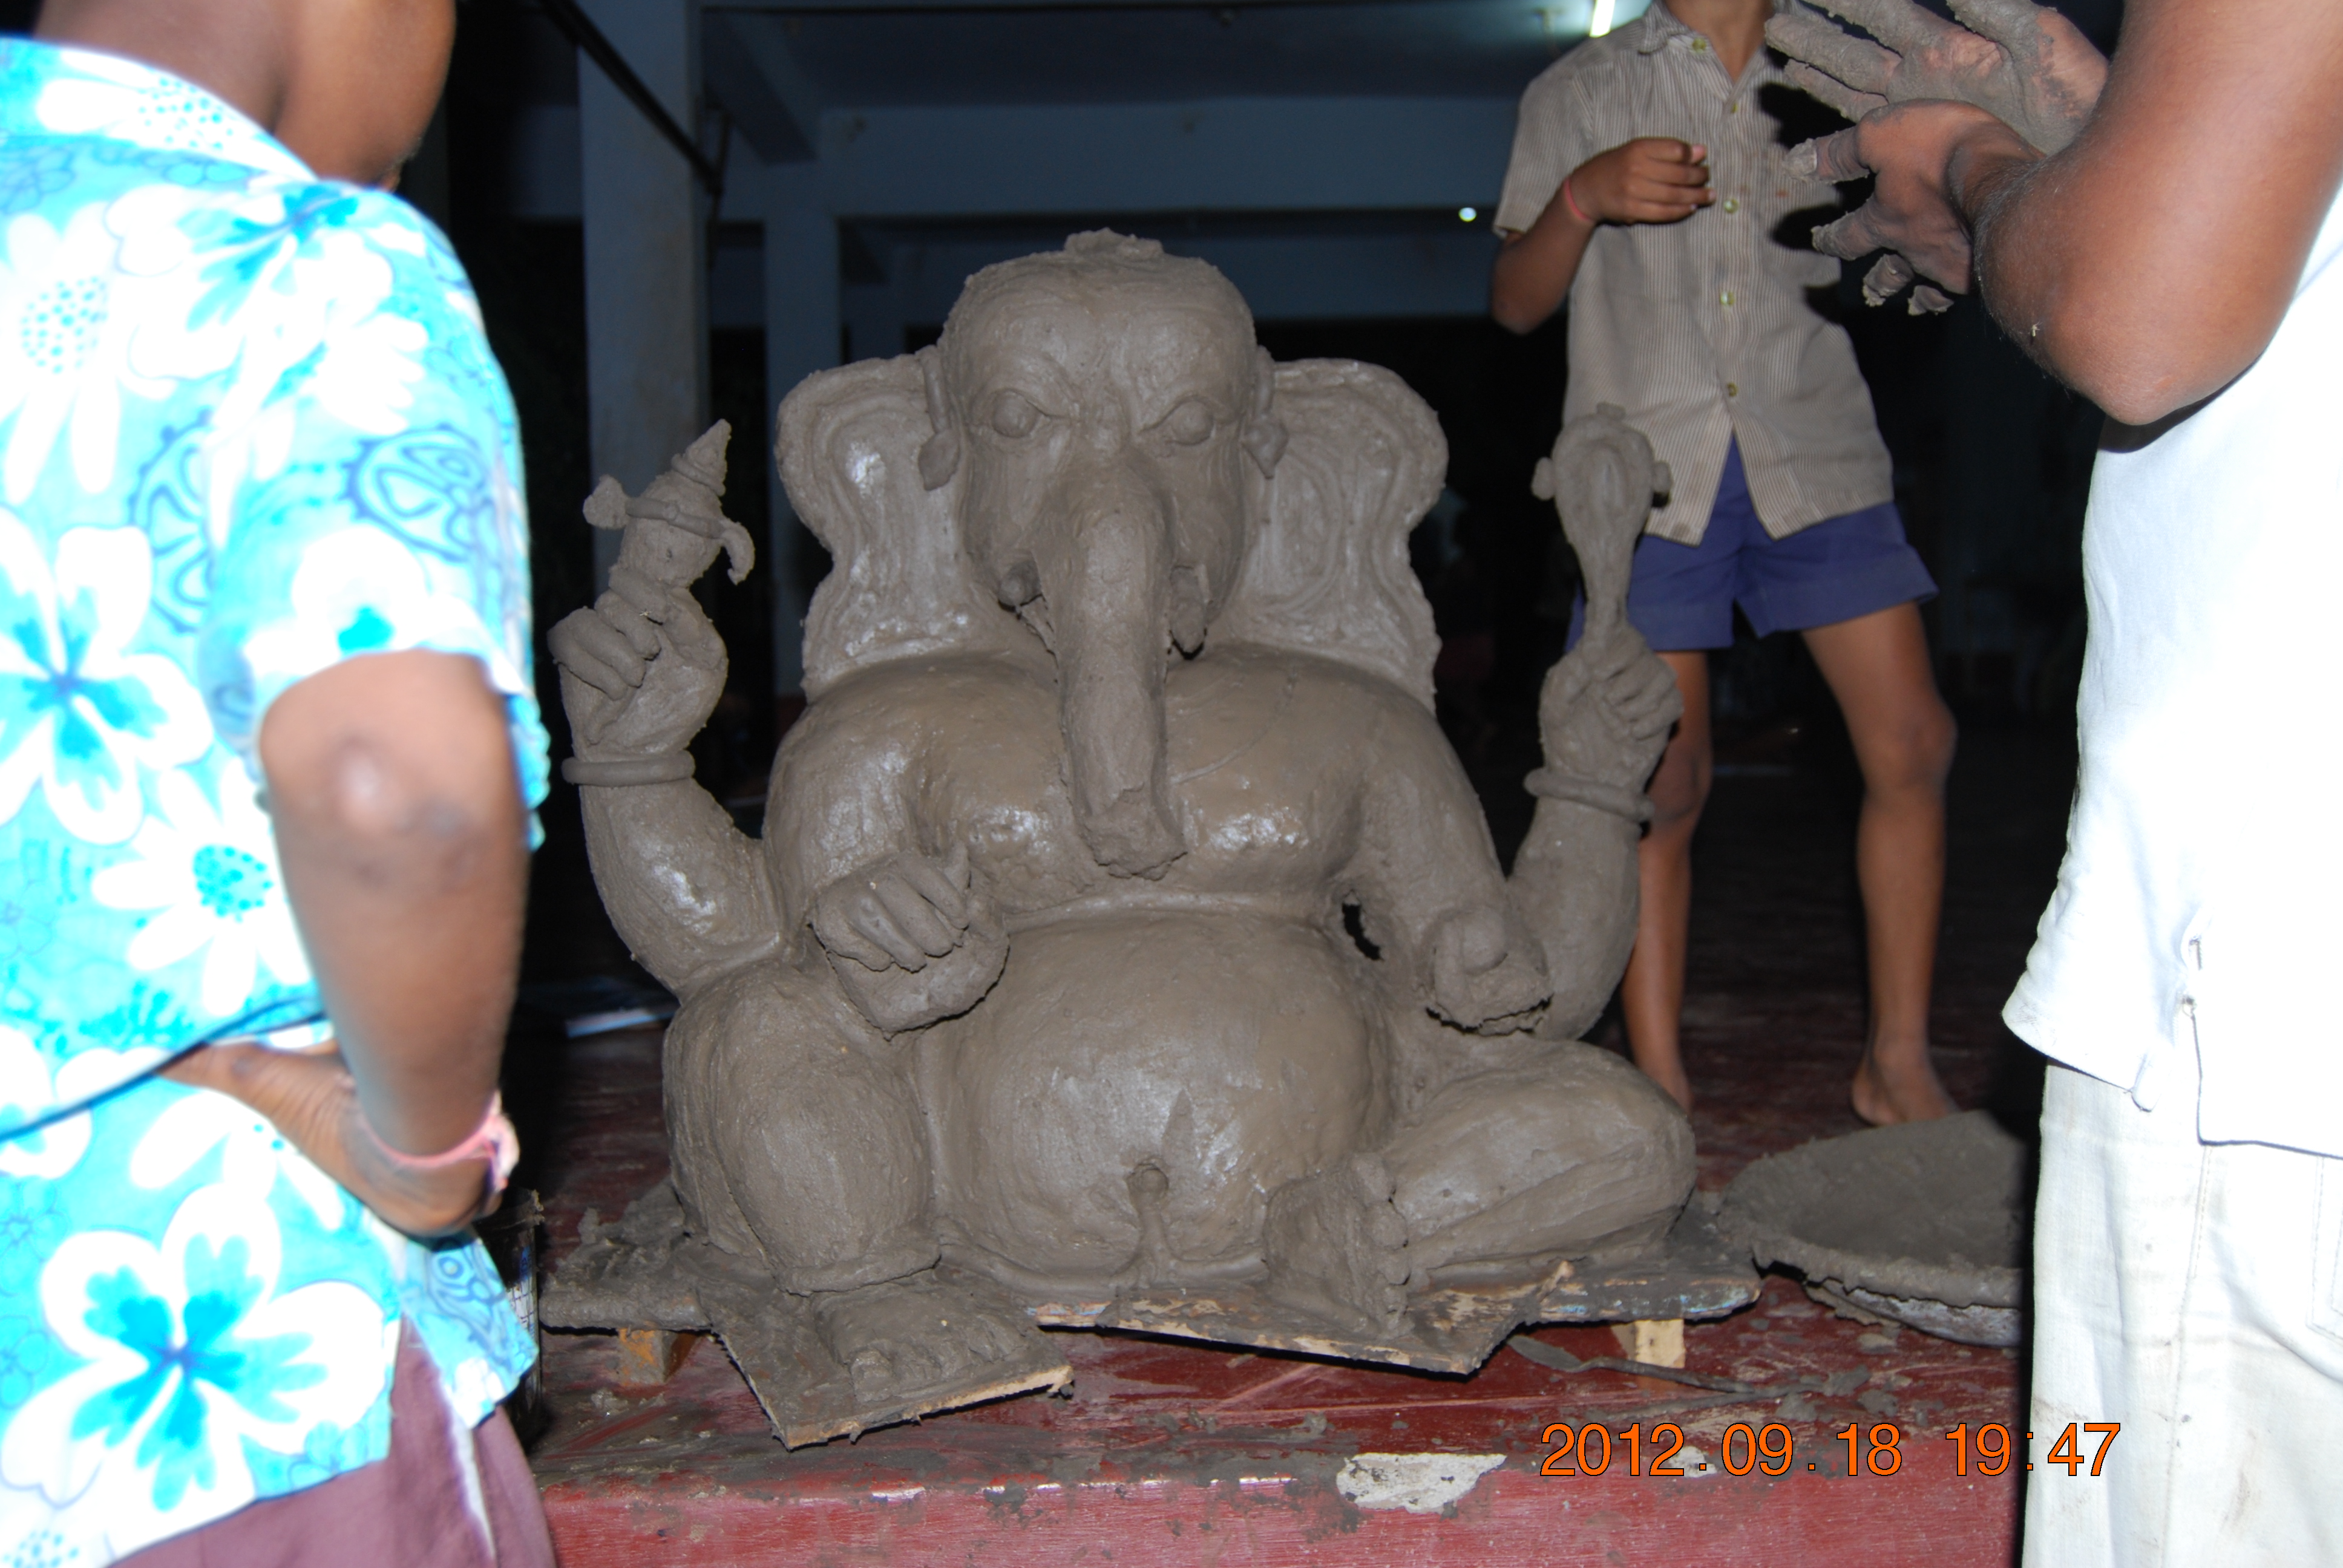 The idol made for puja